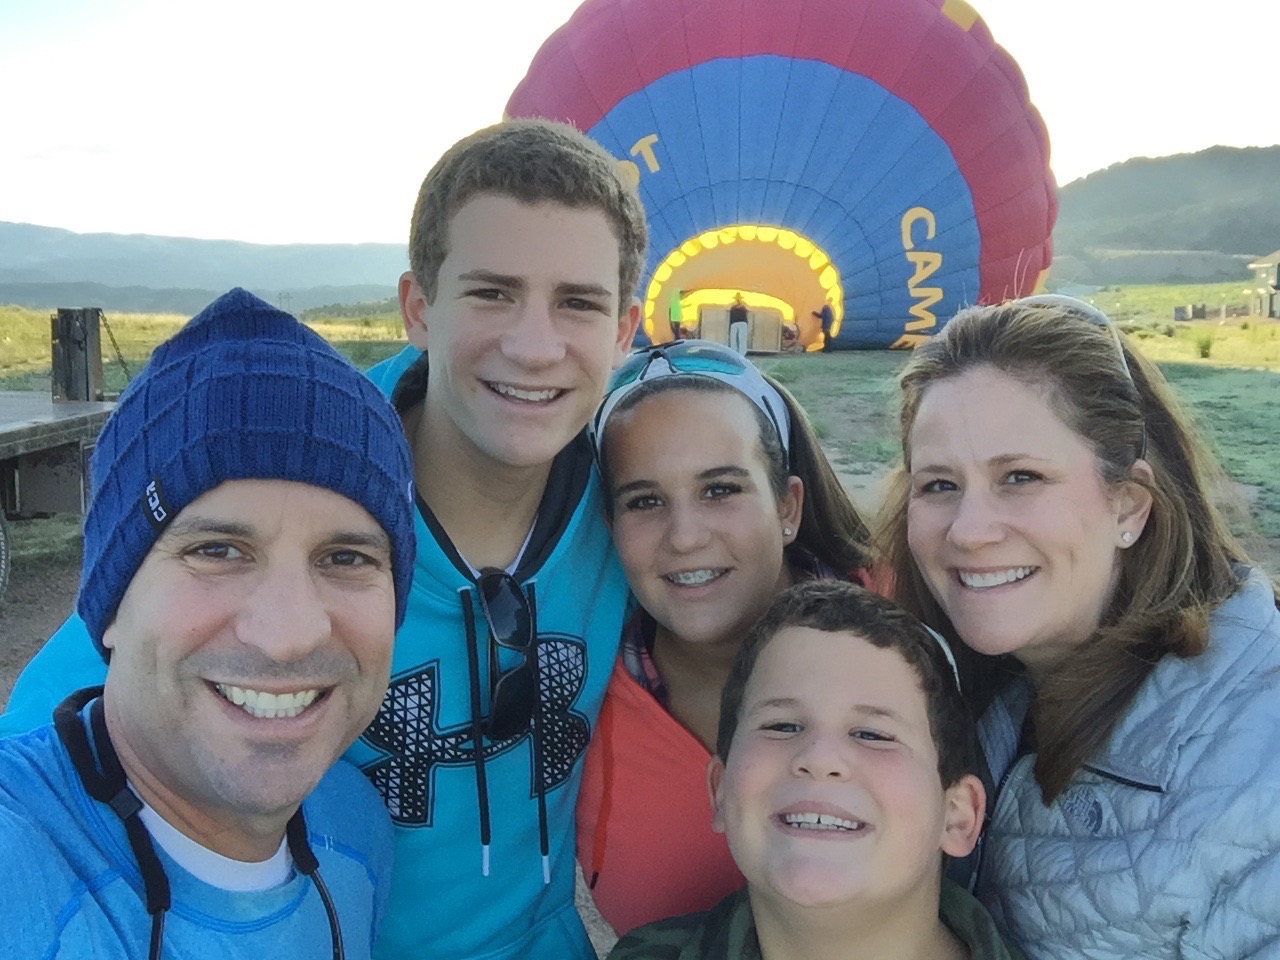 Beaver Creek, CO - Summer of 2015 - Went on a hot air balloon - Another thing to mark off my bucket list